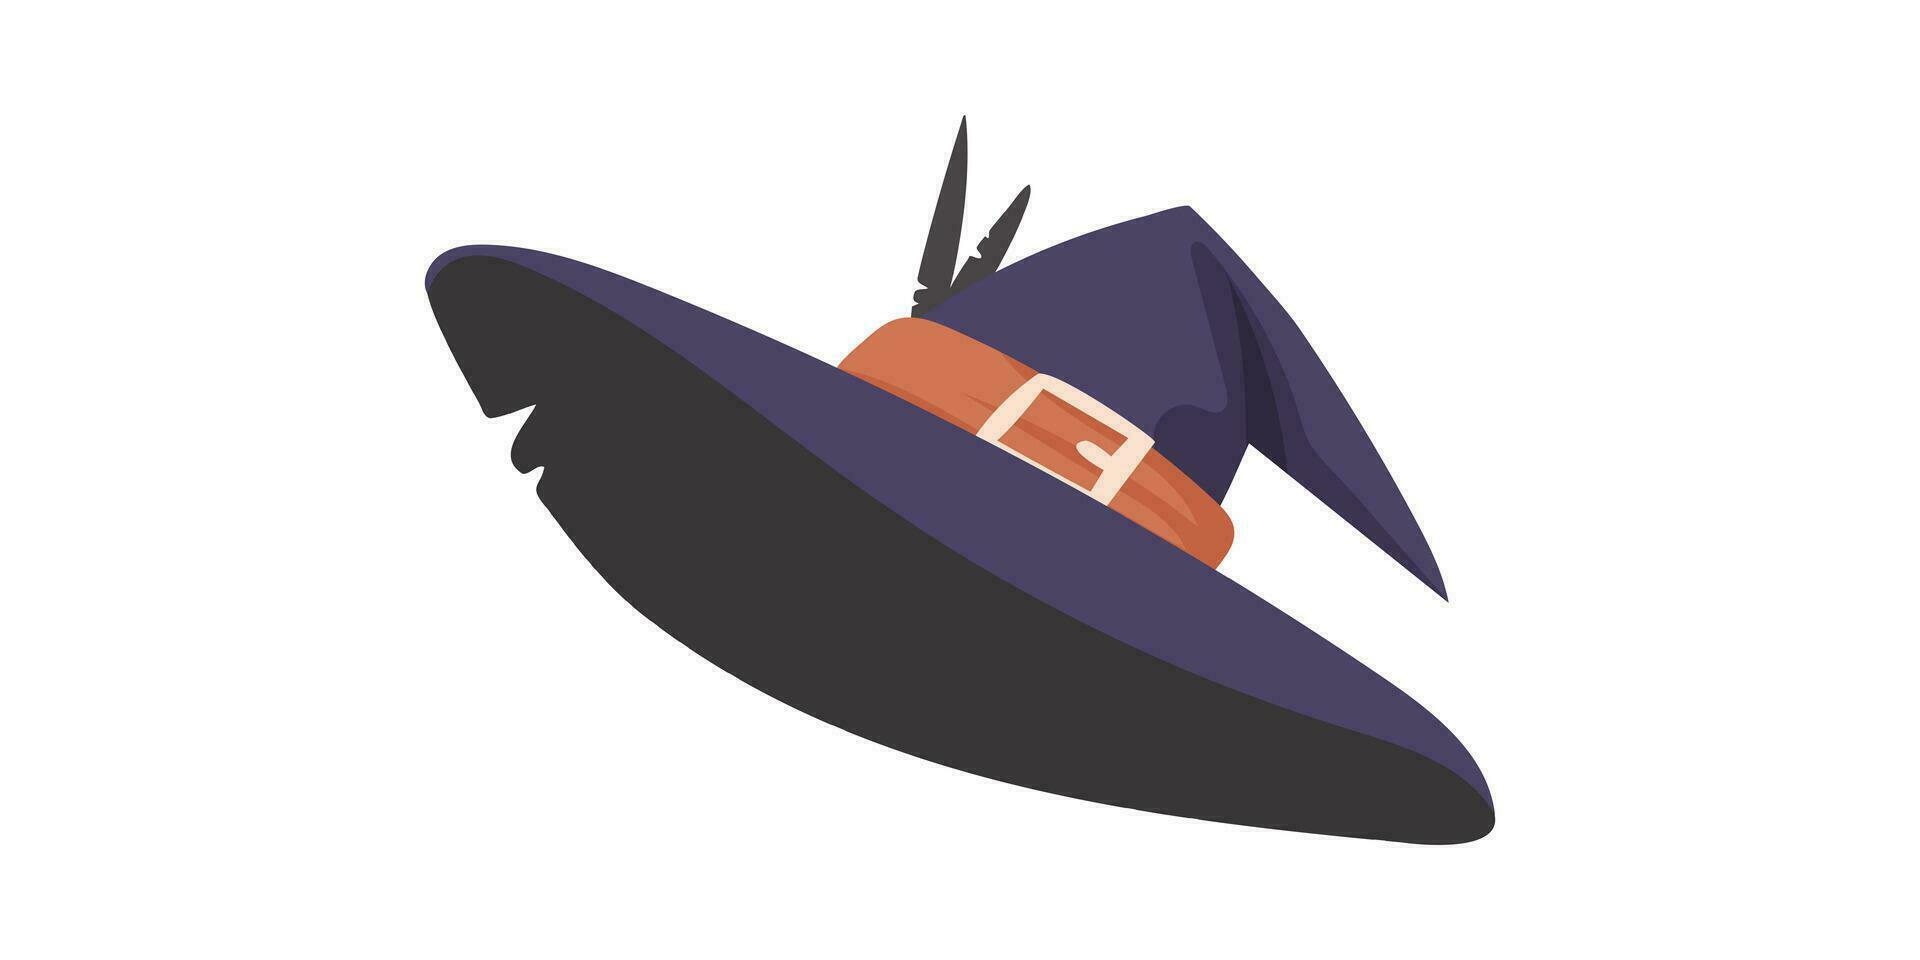 A witch's hat is a tall hat that witches put on their heads. It appears sharp. A baseball cap that looks like a hat for Halloween. Cartoon style, Vector Illustration